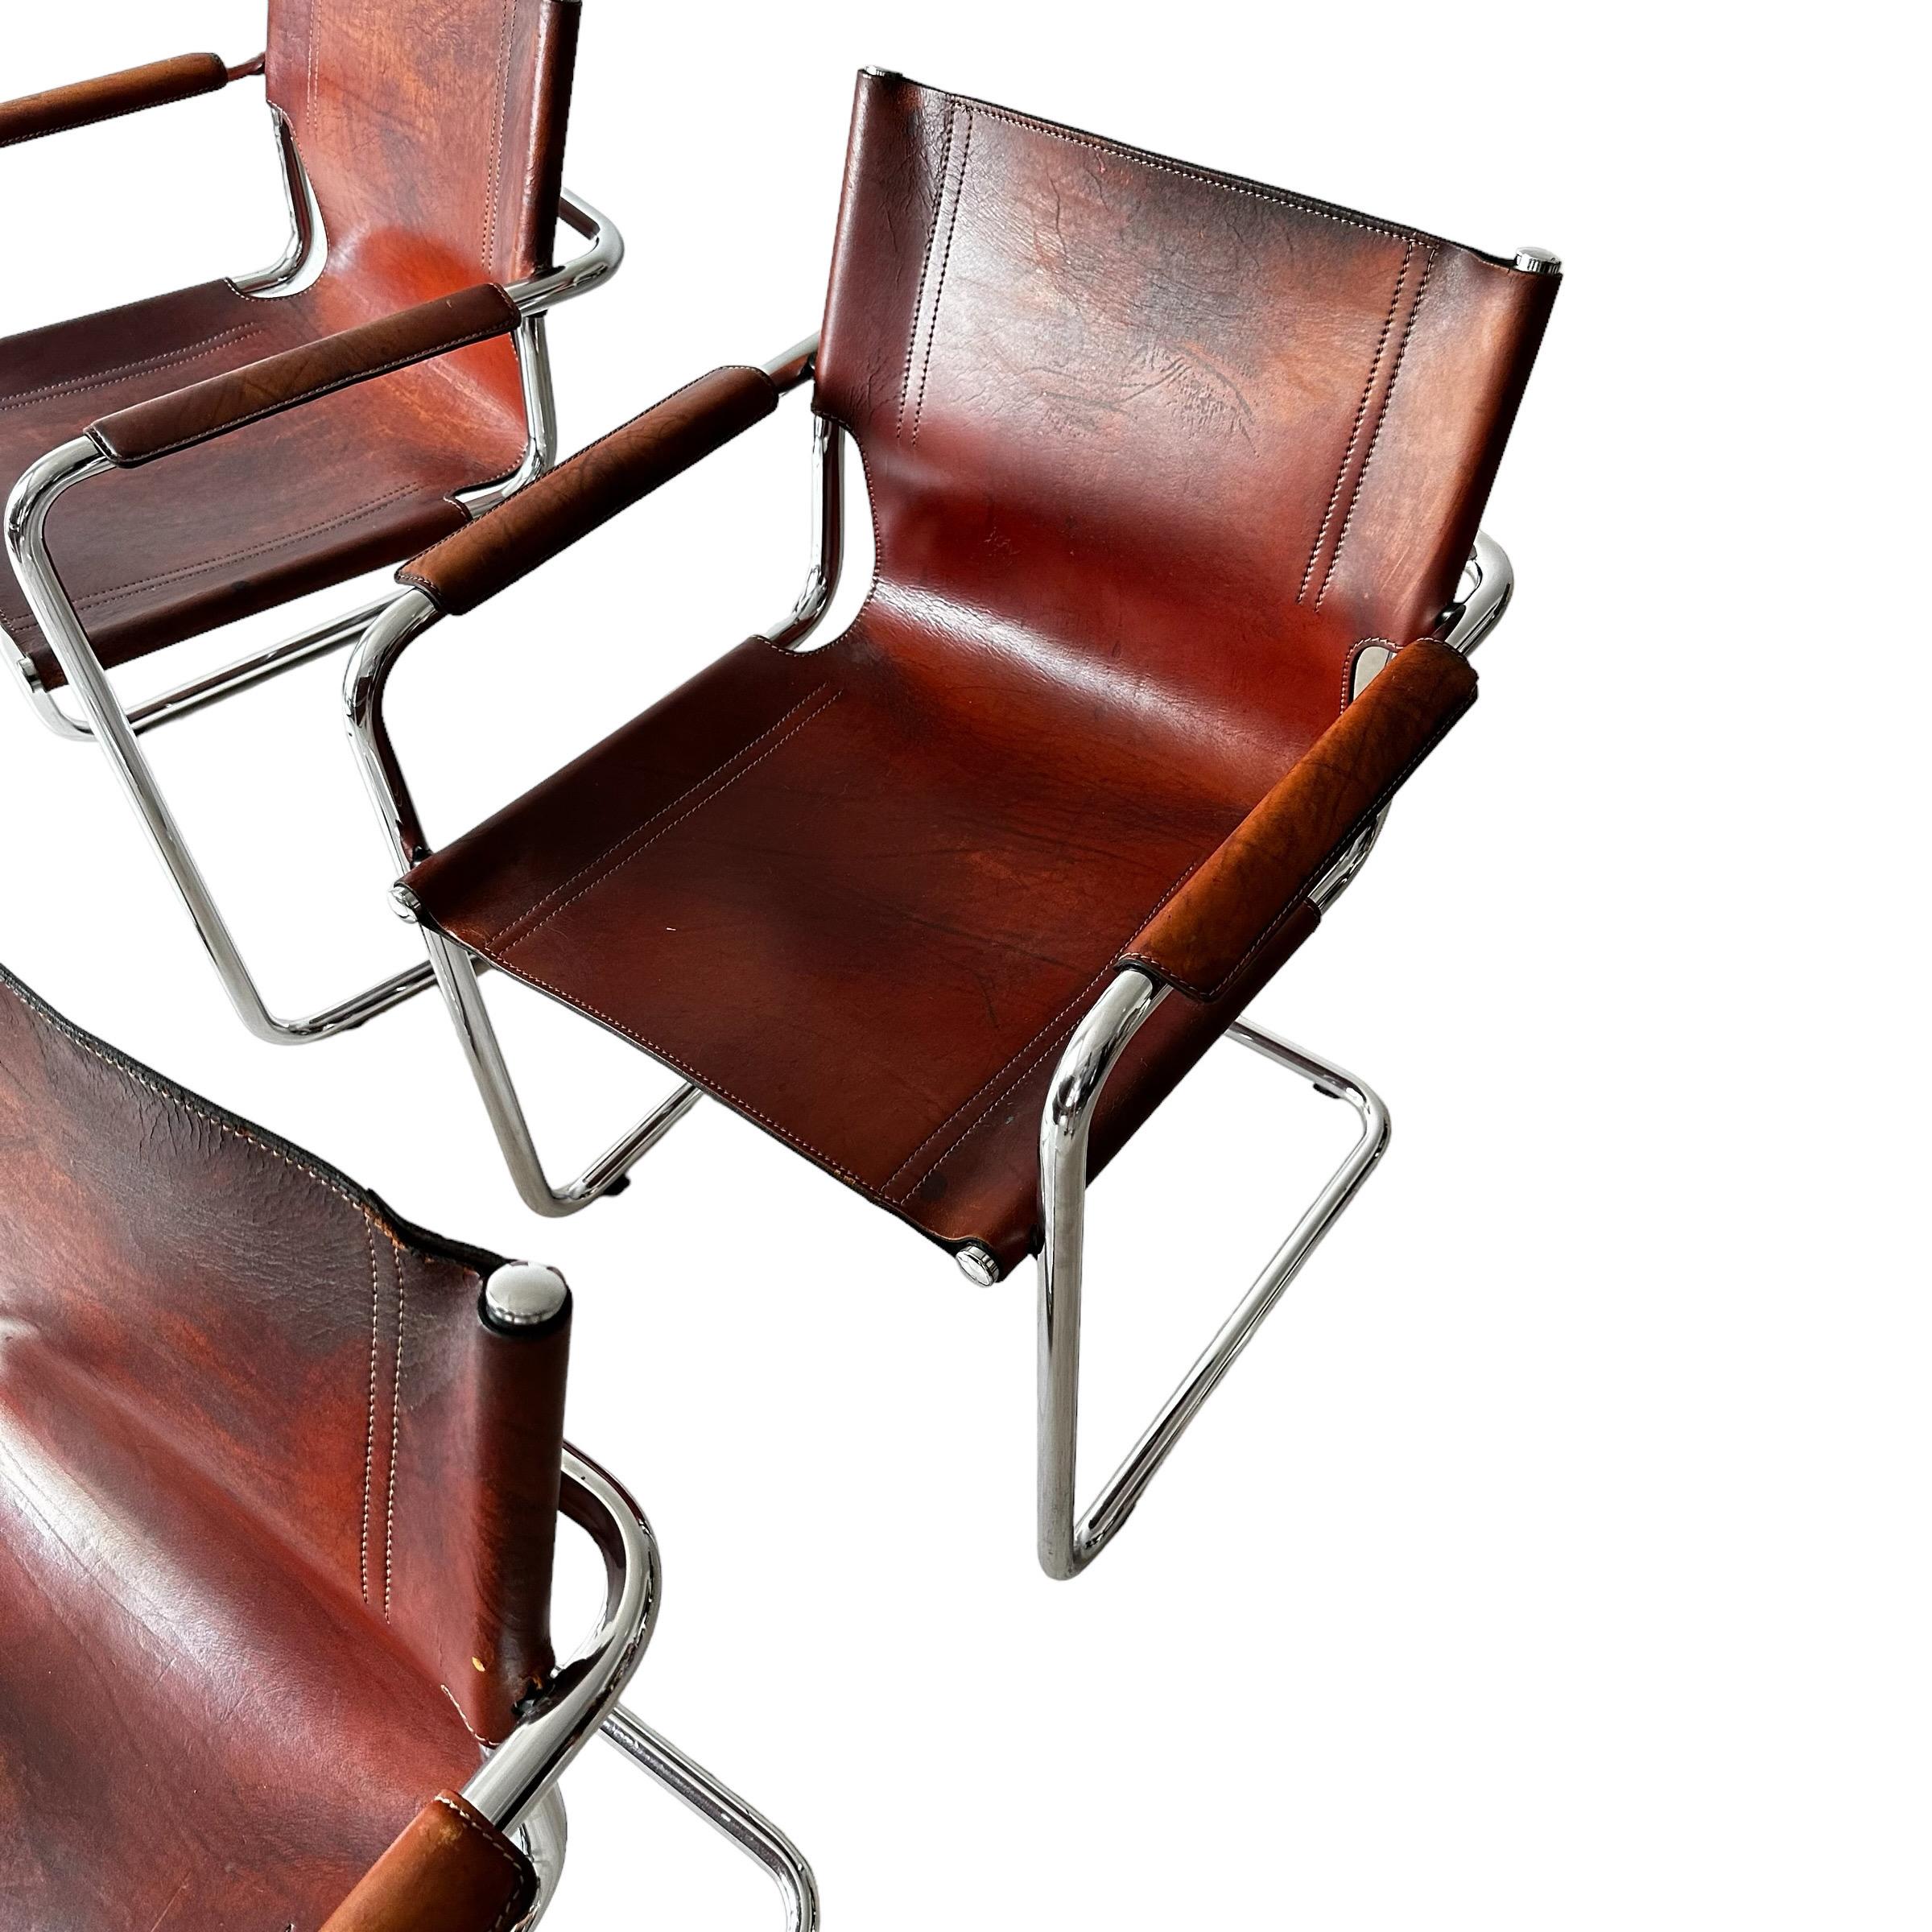 Metal Matteo Grassi, Set of 4 Armchairs in Patinated Cognac Leather, Italy 1970s For Sale